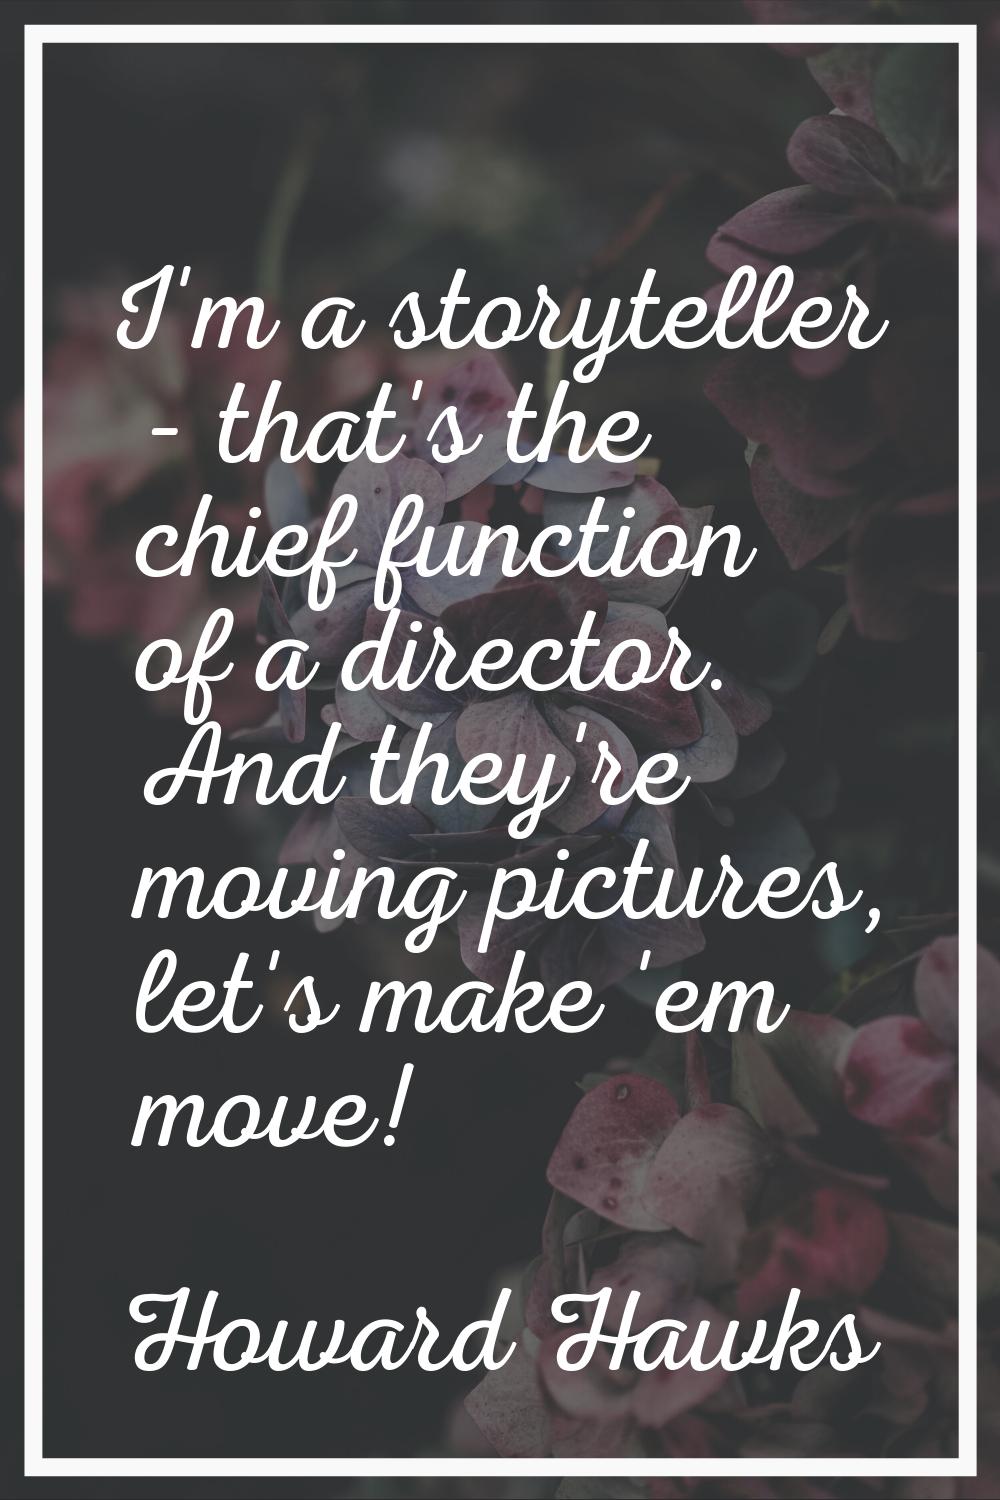 I'm a storyteller - that's the chief function of a director. And they're moving pictures, let's mak